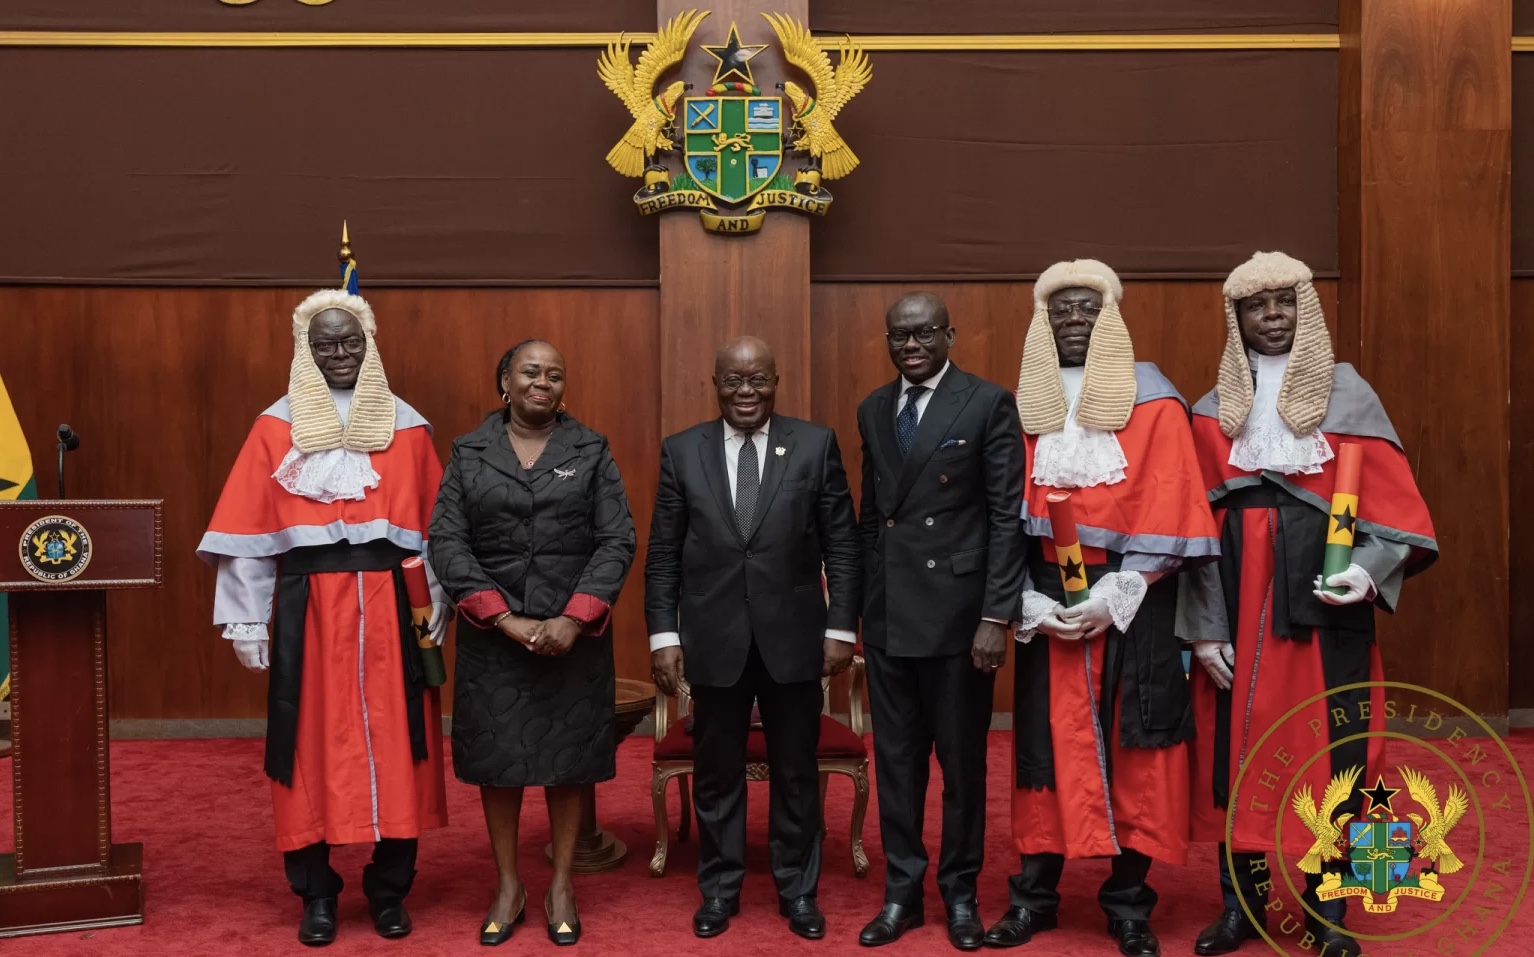 Women Judges Key To Increased Confidence In Judiciary – Pres Akufo-Addo